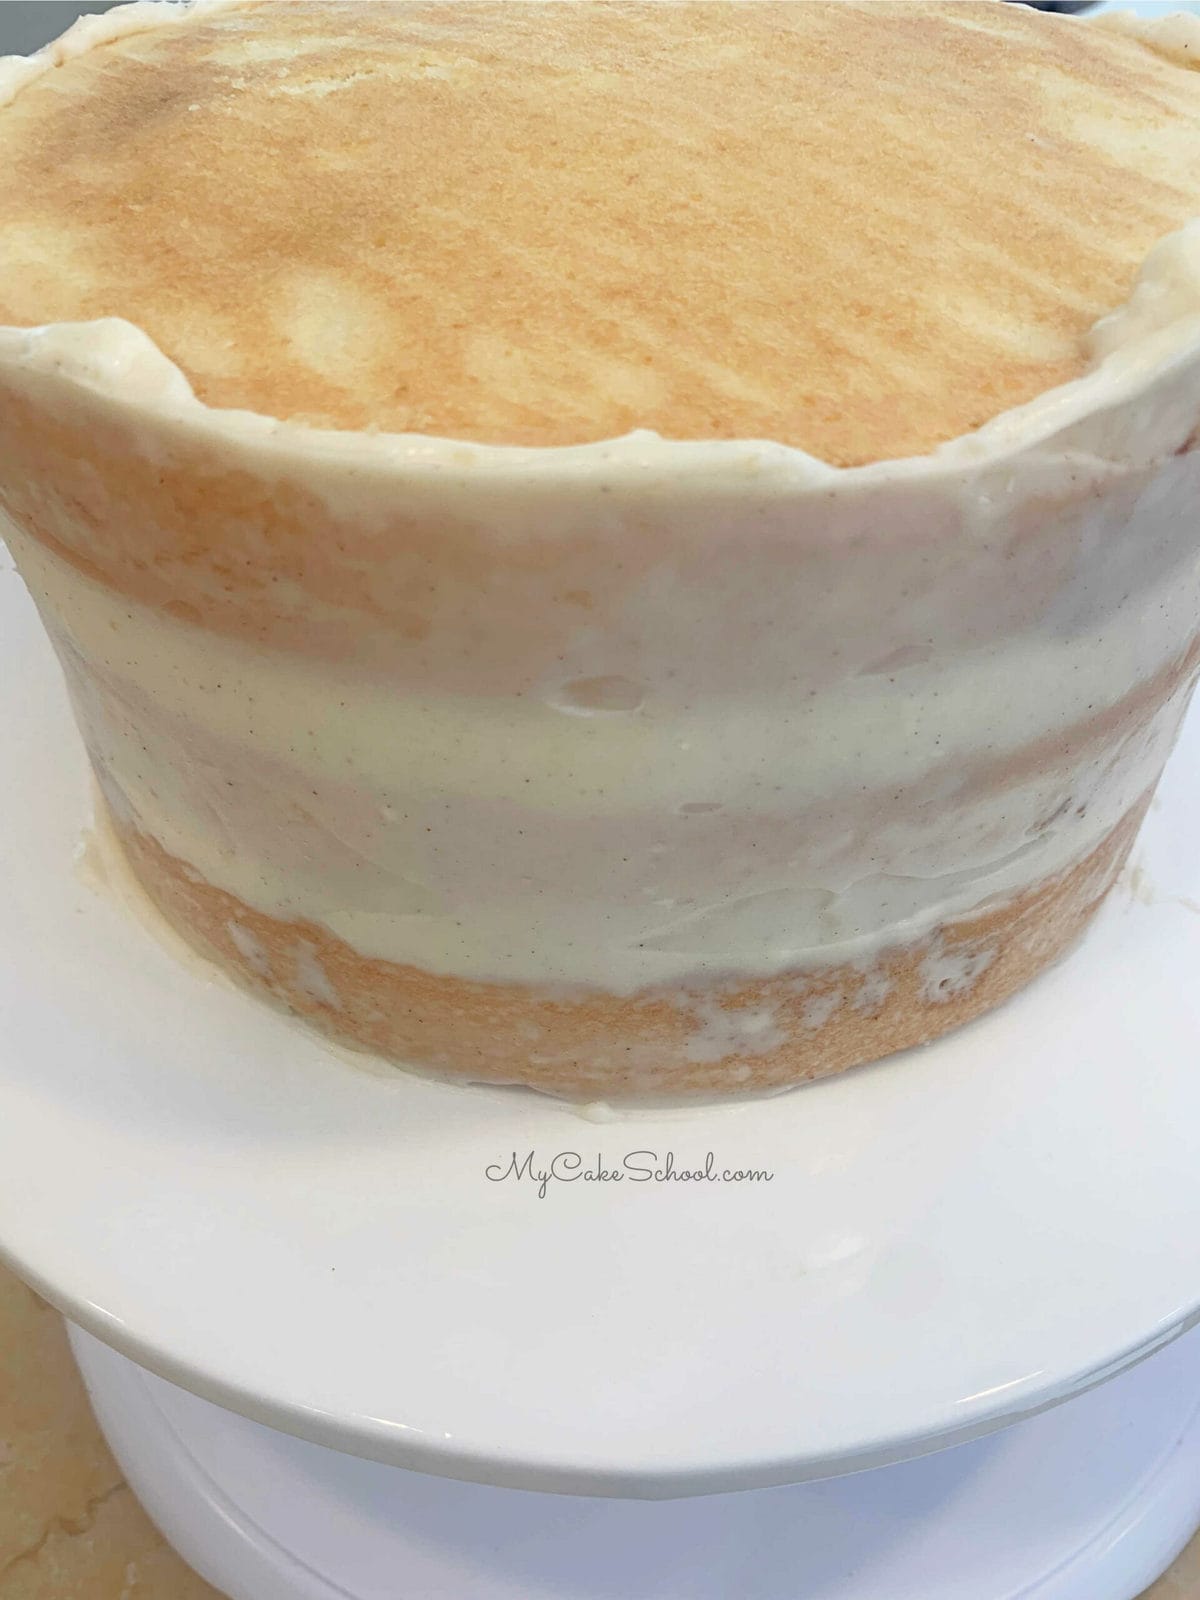 Snickerdoodle Cake Recipe from Scratch- This moist homemade recipe is the best!